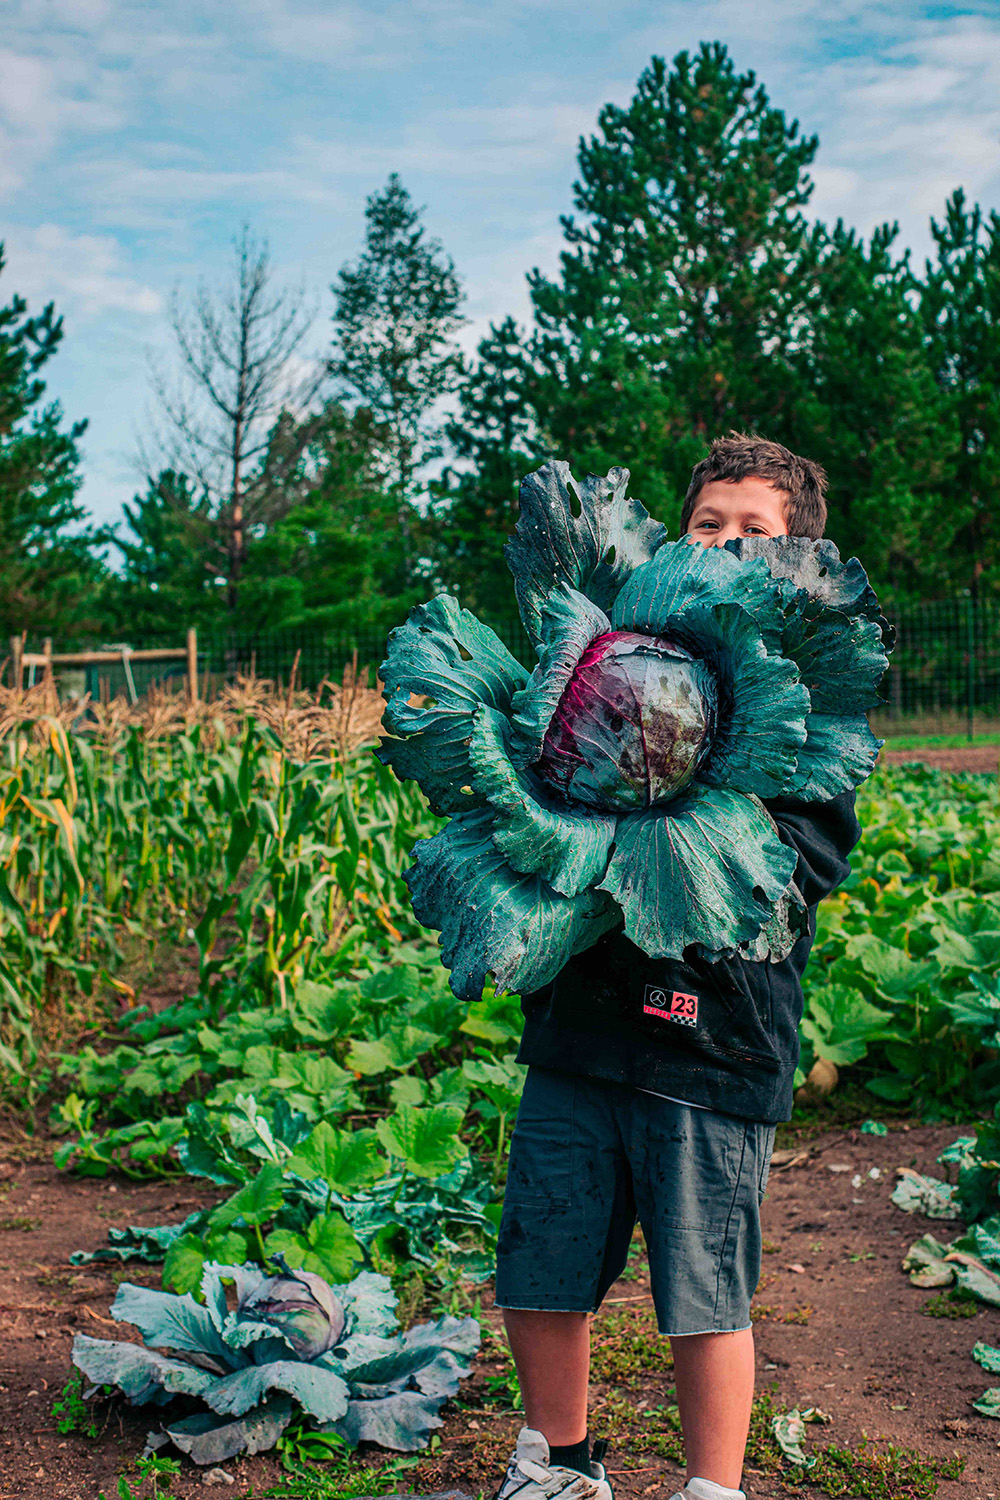 A child stands in a garden holding a giant cabbage that covers most of their face. The lush garden, reminiscent of the fresh produce found at Whole Foods Coop in Duluth, MN, features green plants and tall corn stalks. Trees and a cloudy sky can be seen in the distance. The child wears a black hoodie and grey shorts.